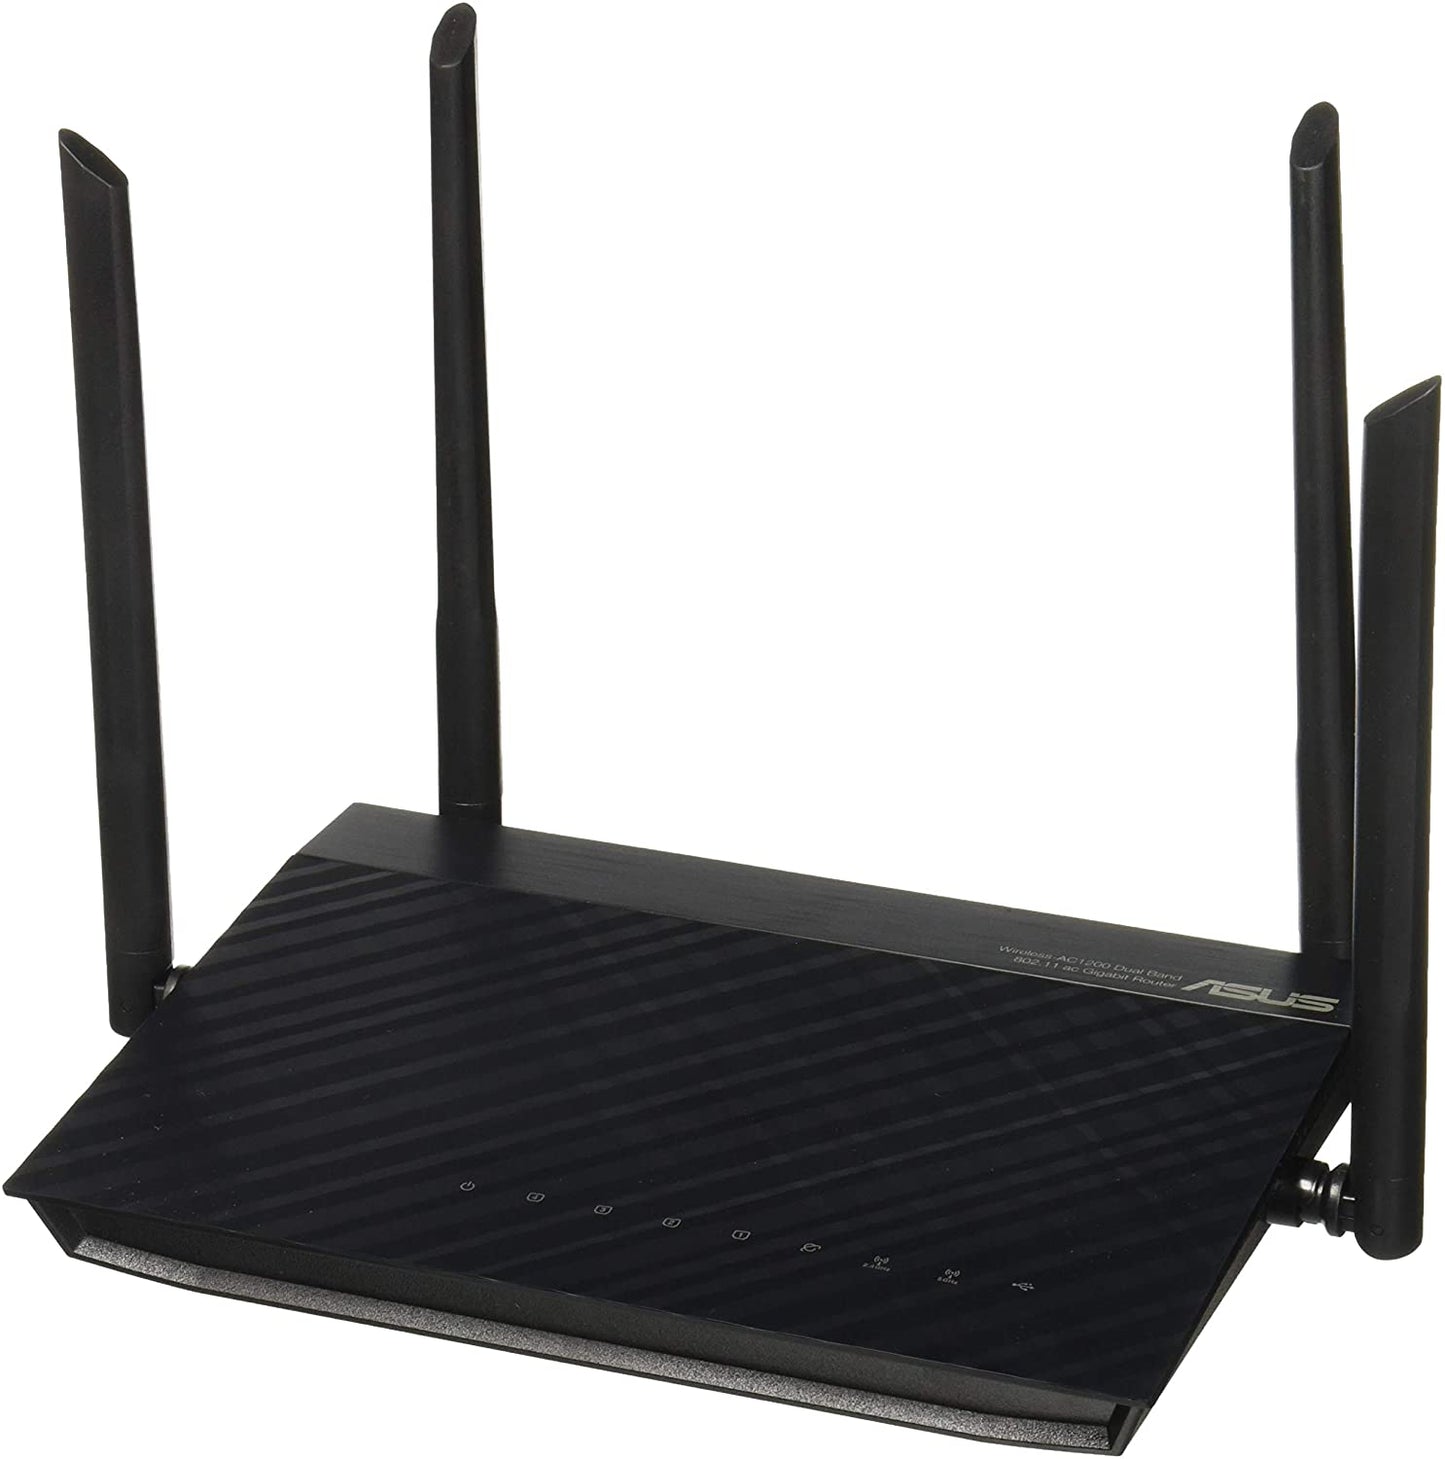 Asus RTAC1200G Wireless Dual-Band Router - Refurbished